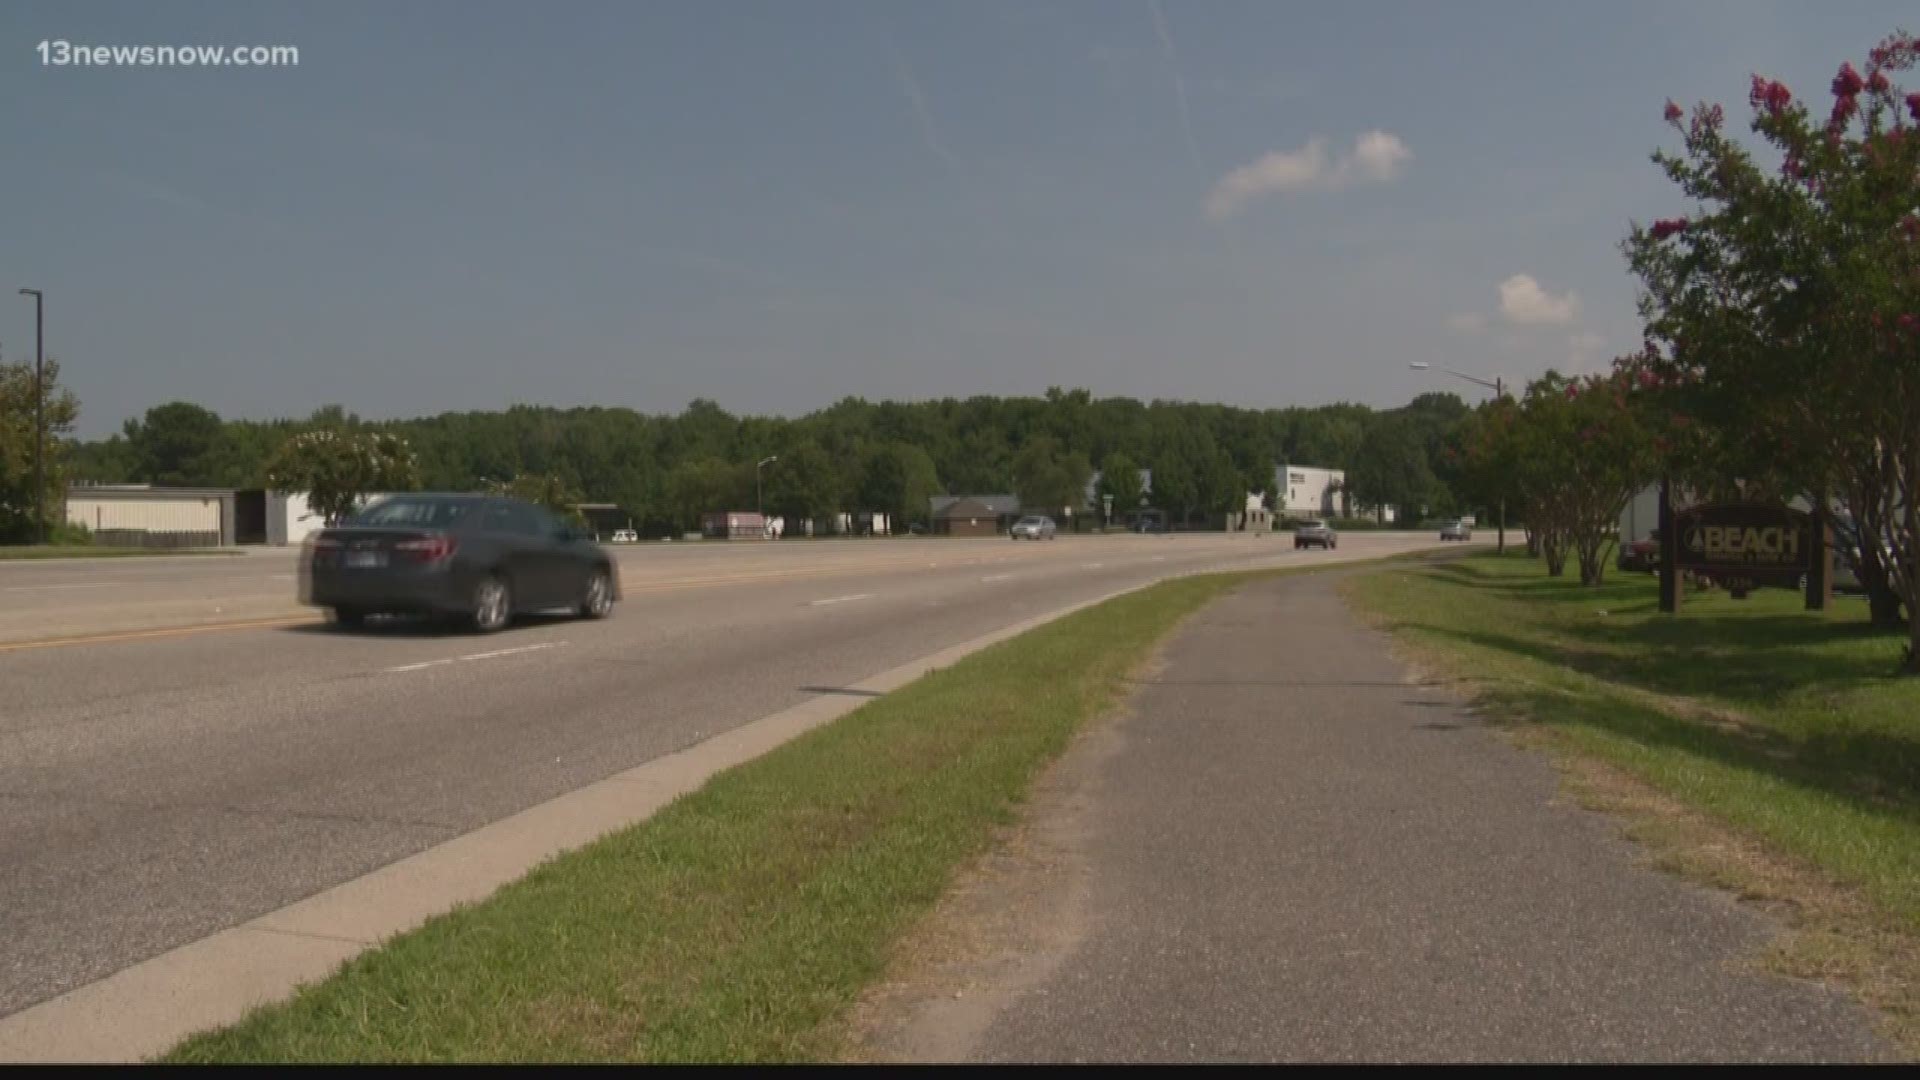 A road near Naval Air Station will be under construction starting this weekend.